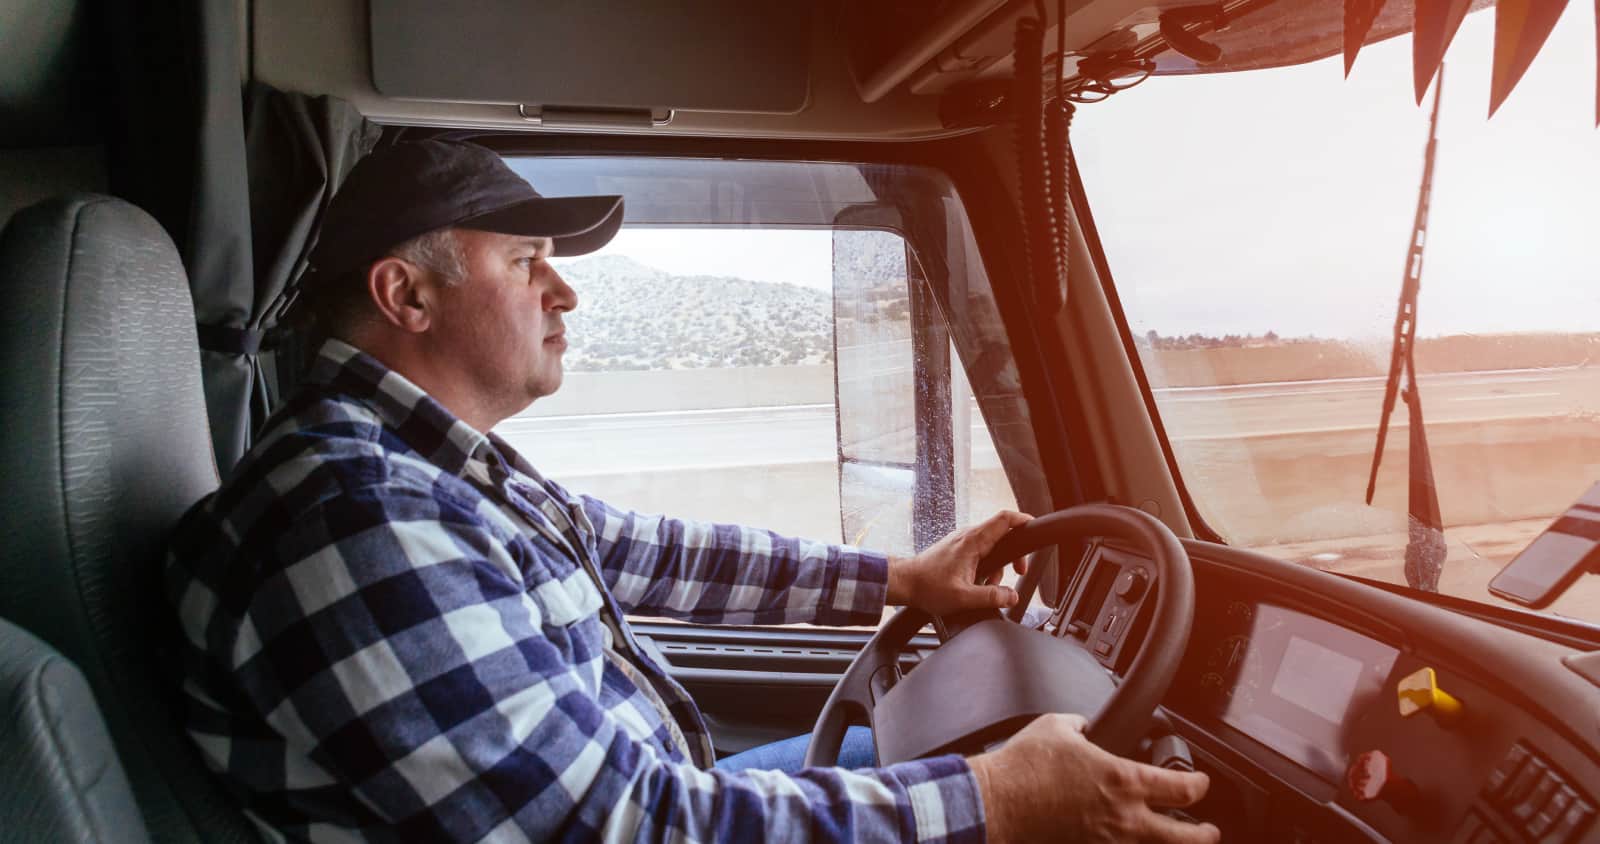 Top 7 Seat Cushions for Truck Drivers - Used by Truckers Daily